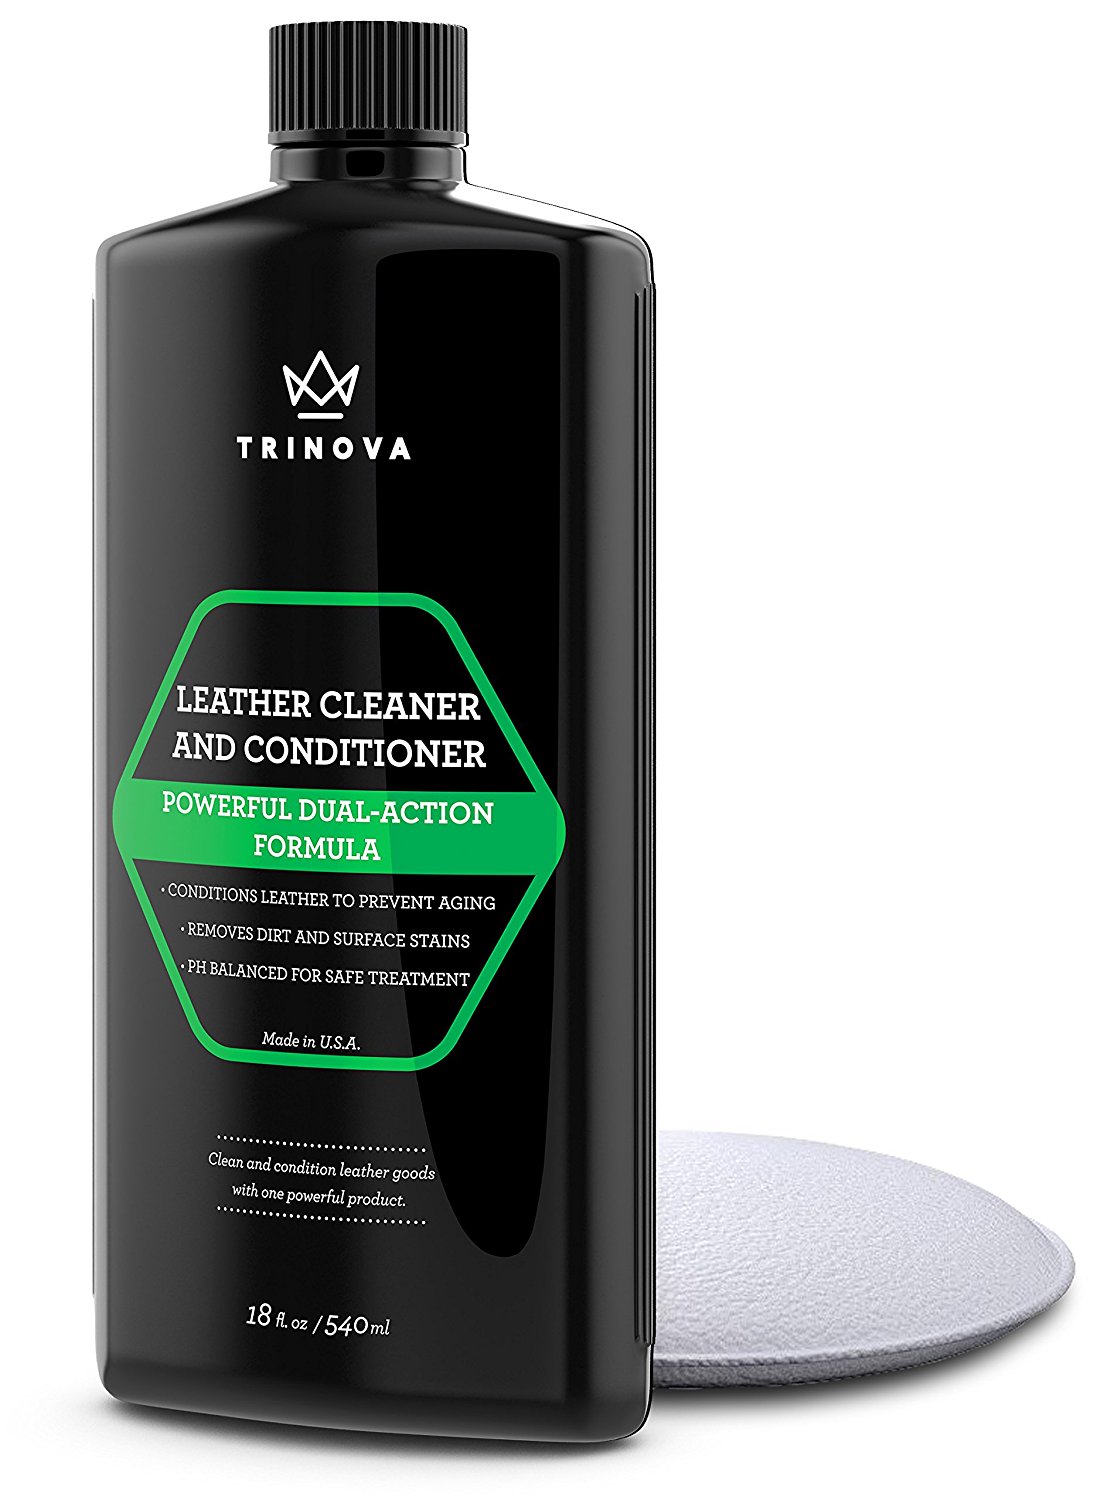 TriNova Leather Conditioner and Cleaner, 18 oz / 540 ml